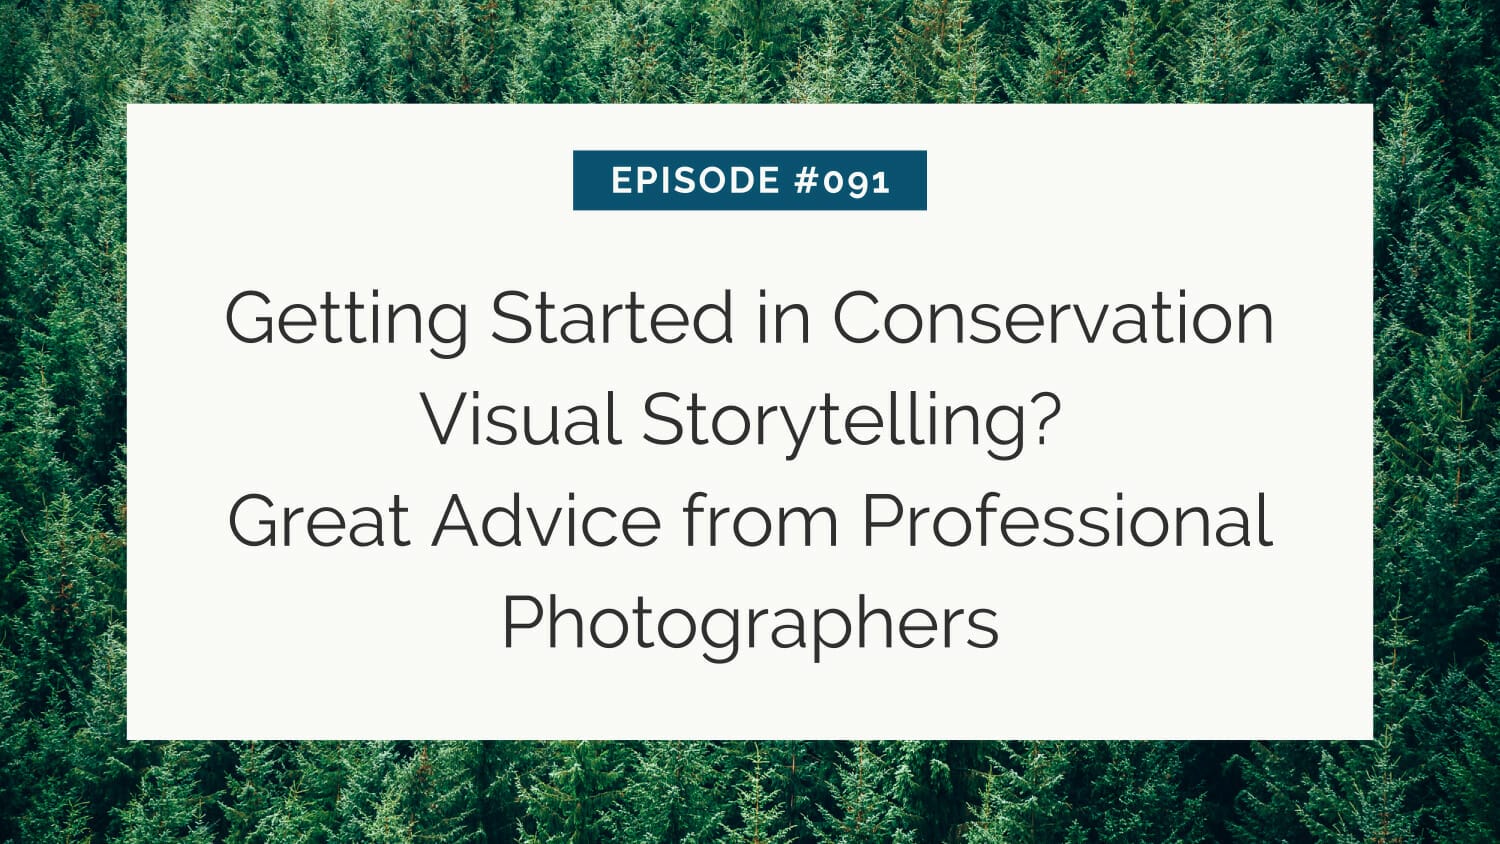 Aerial view of a dense forest with overlay text about an episode on conservation visual storytelling advice from professional photographers.